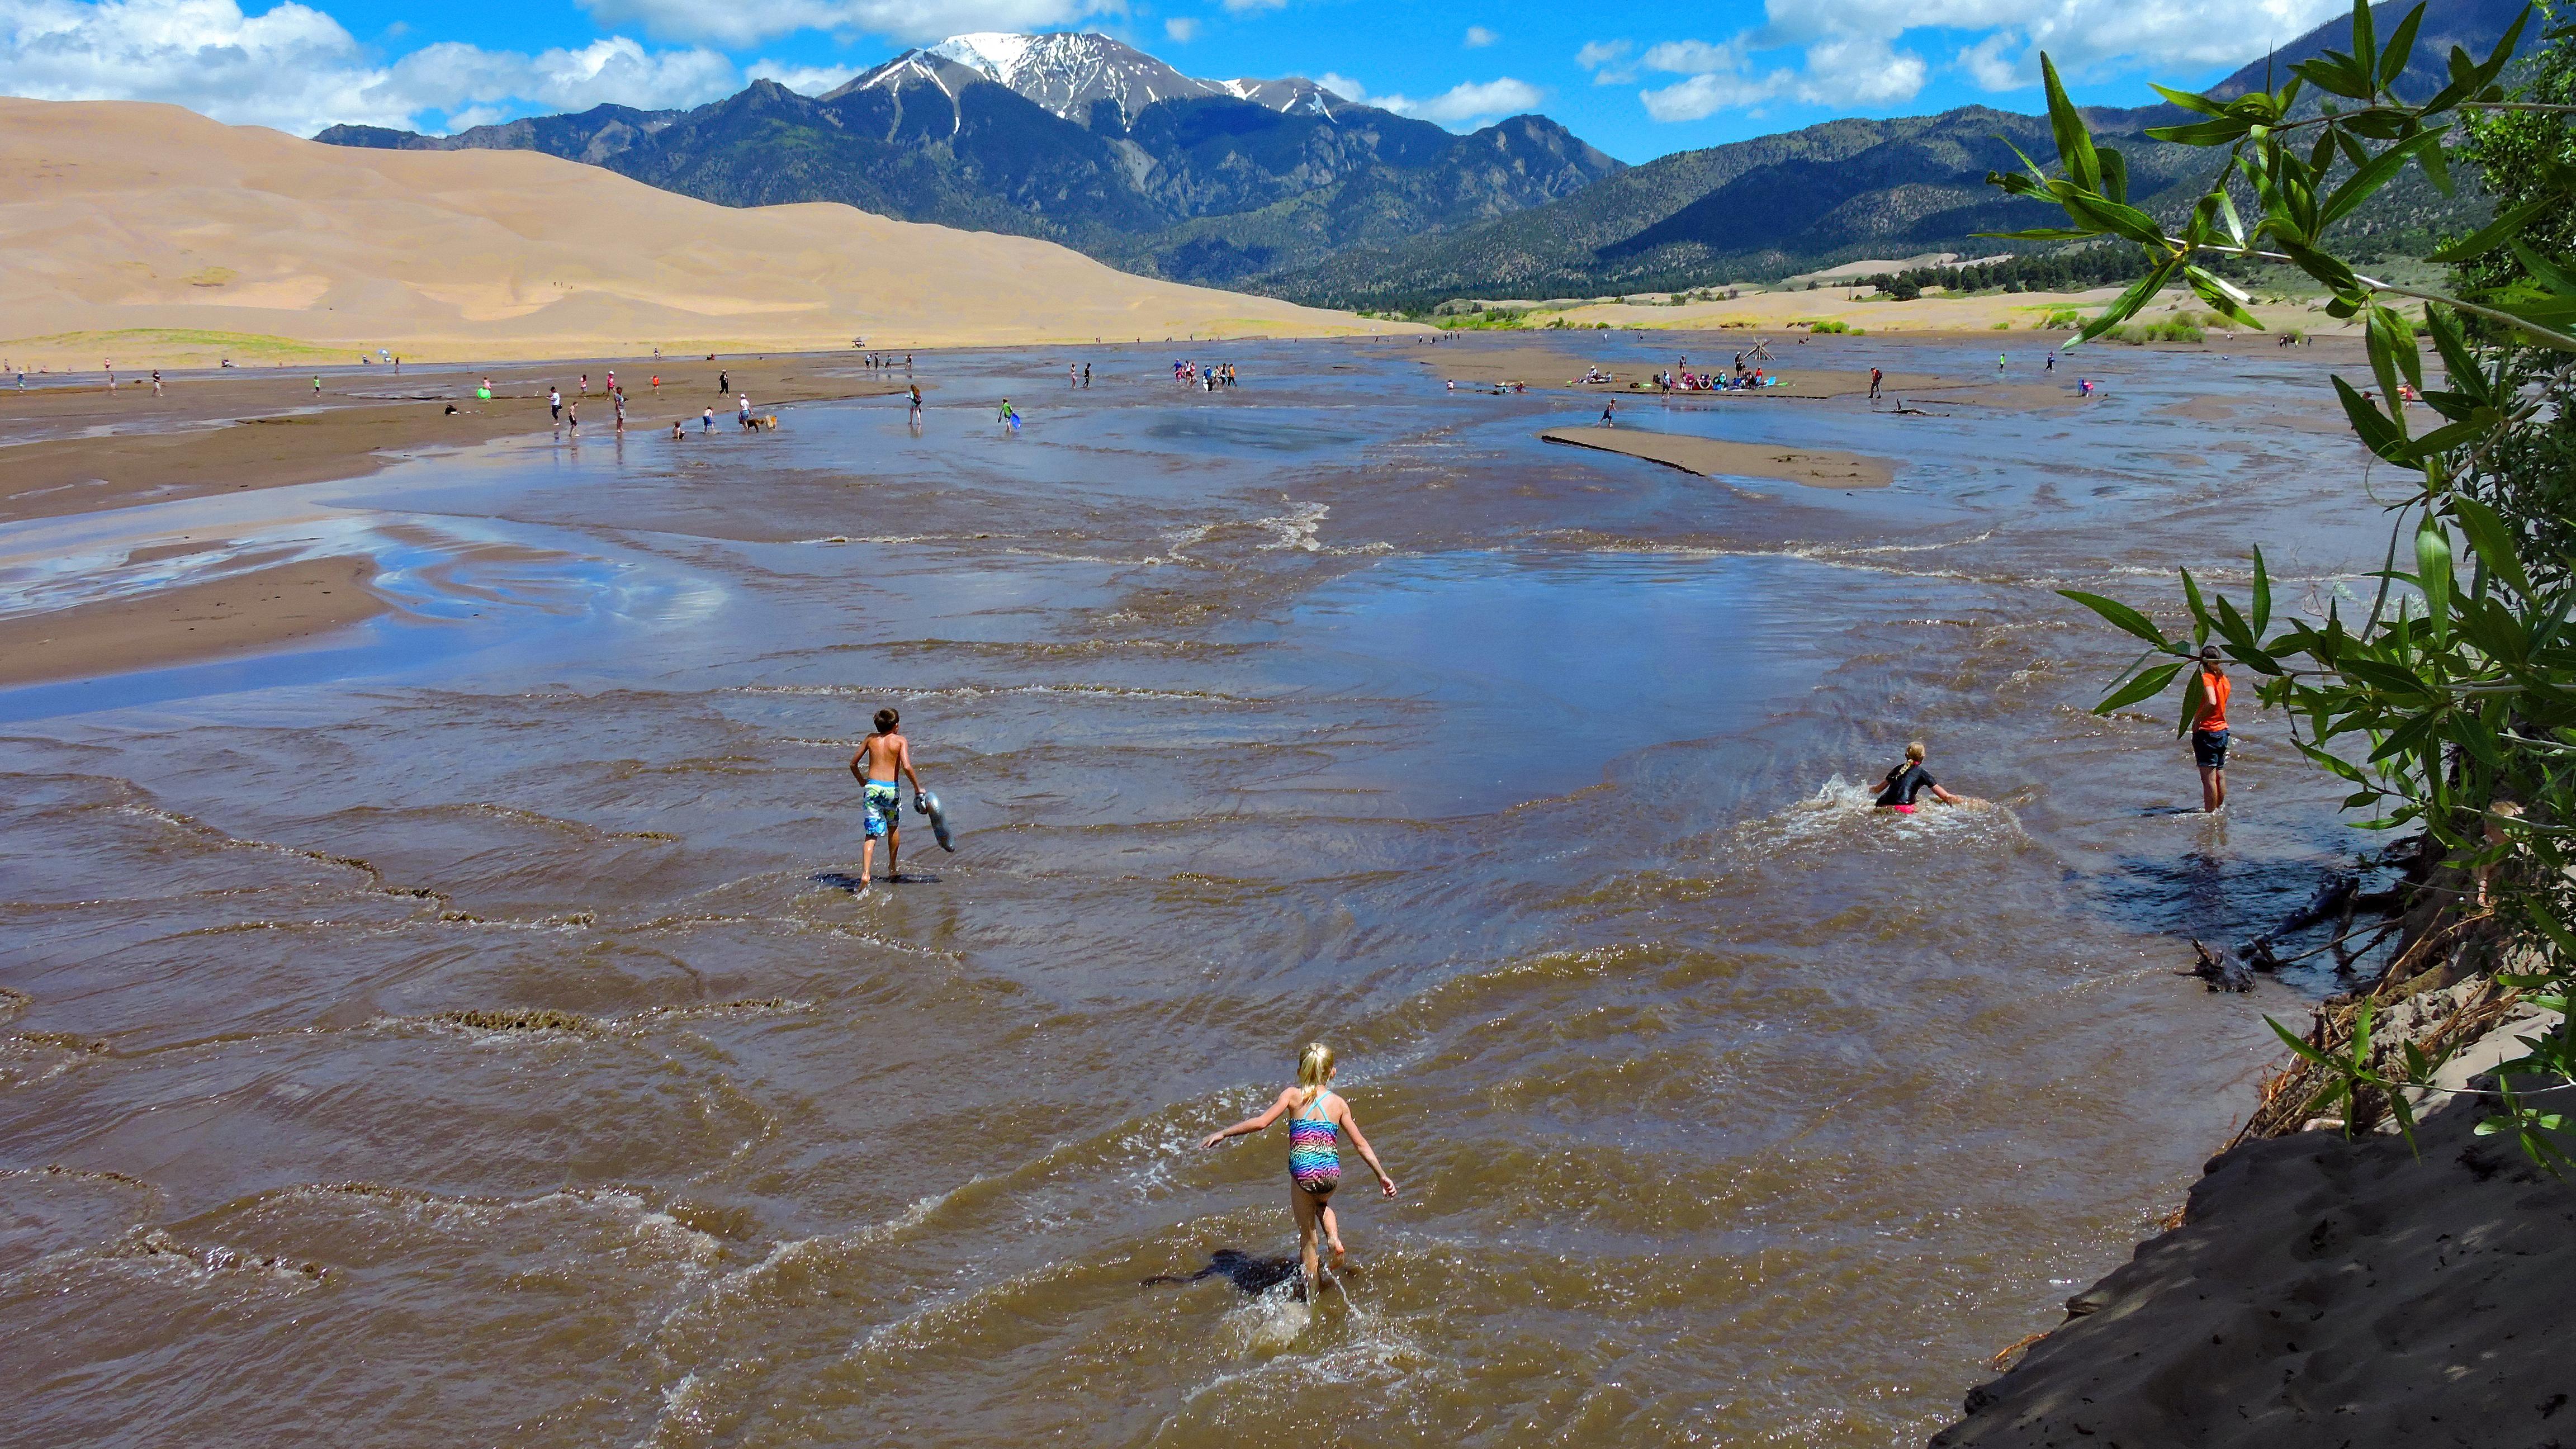 The Insider's Guide to Great Sand Dunes National Park - 5280